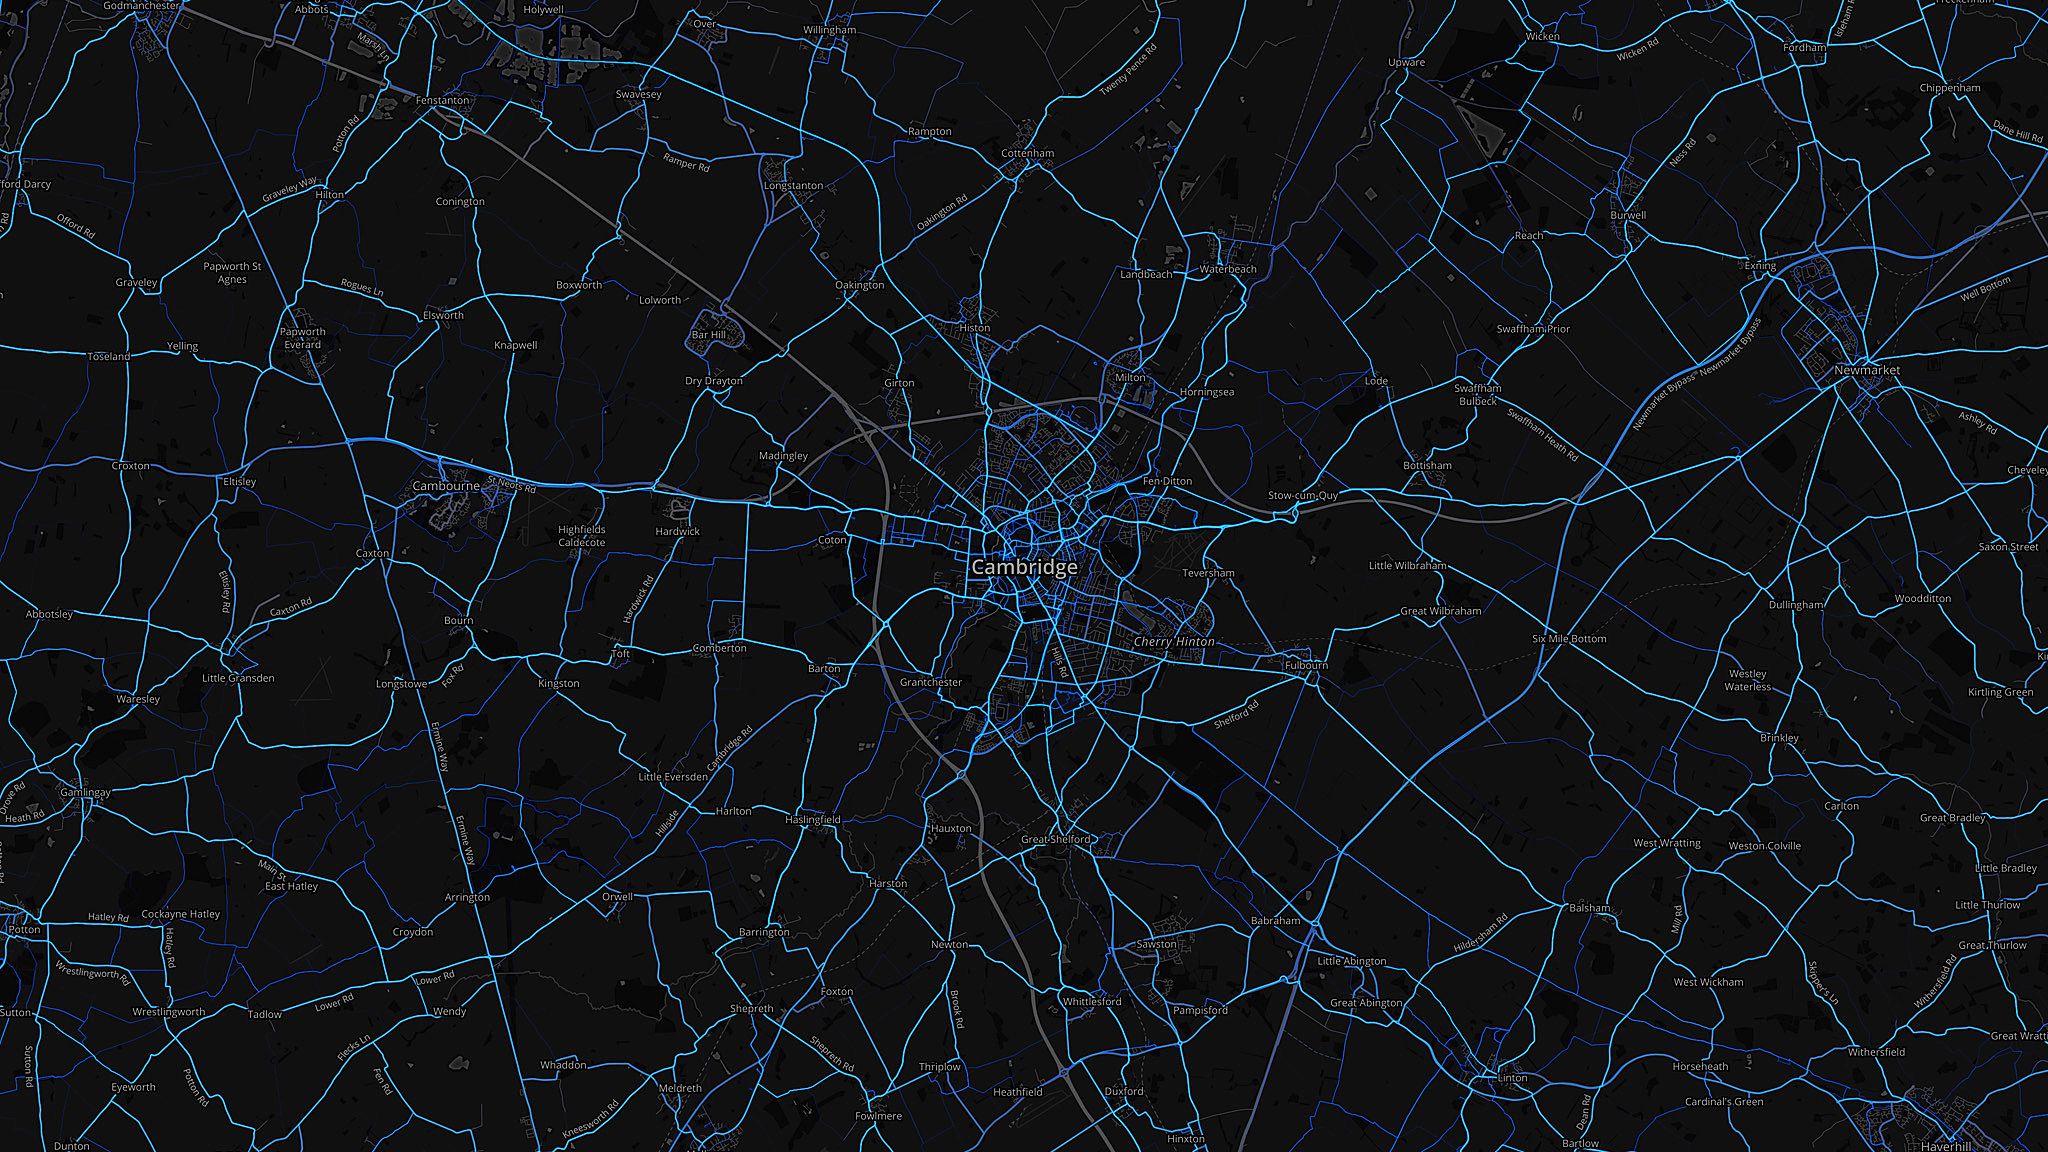 Cambridge - cycling routes (by Strava users 2015)